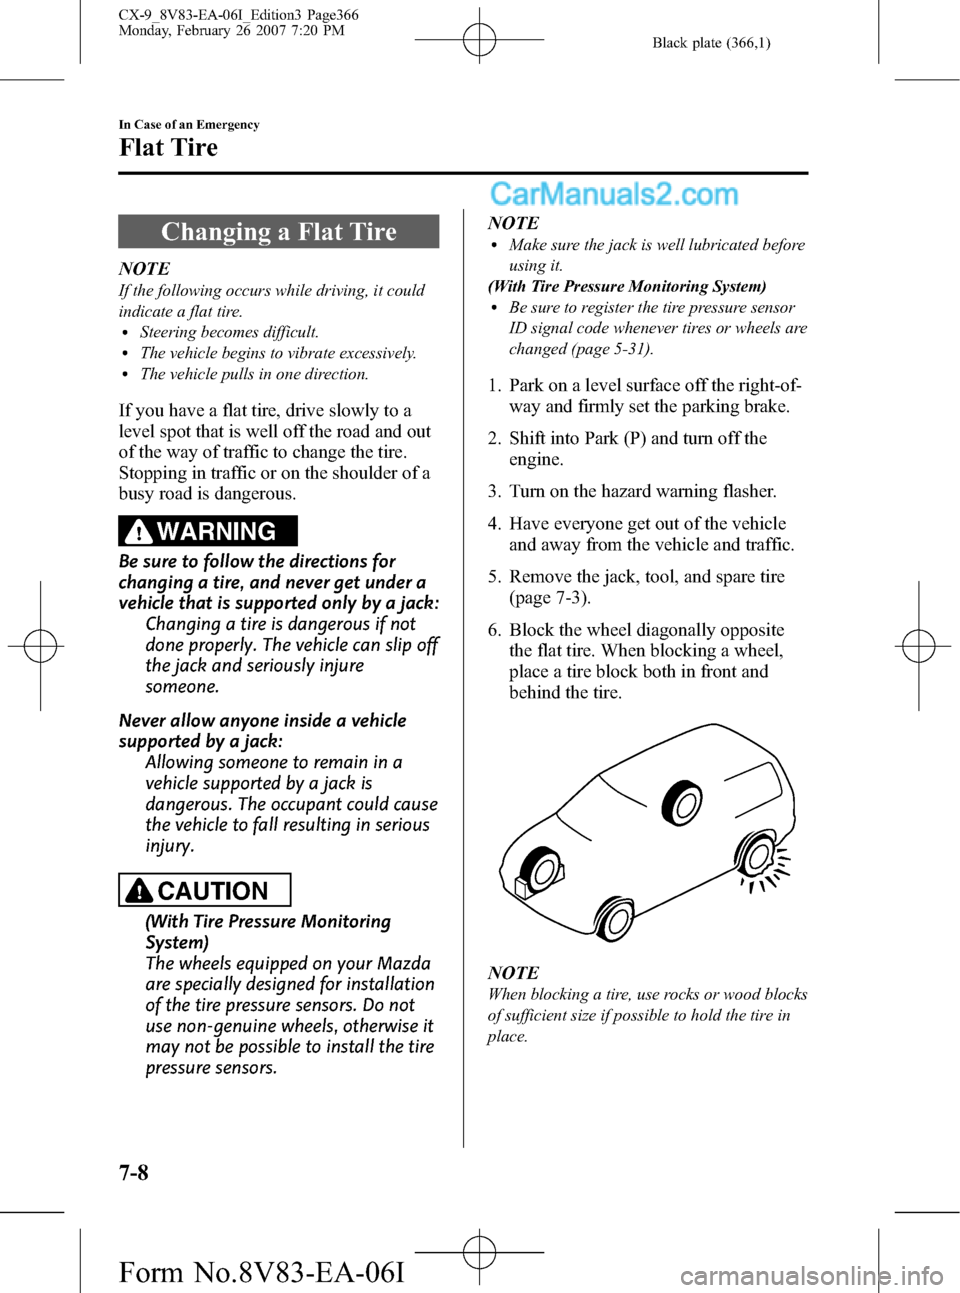 MAZDA MODEL CX-9 2007  Owners Manual (in English) Black plate (366,1)
Changing a Flat Tire
NOTE
If the following occurs while driving, it could
indicate a flat tire.
lSteering becomes difficult.lThe vehicle begins to vibrate excessively.lThe vehicle 